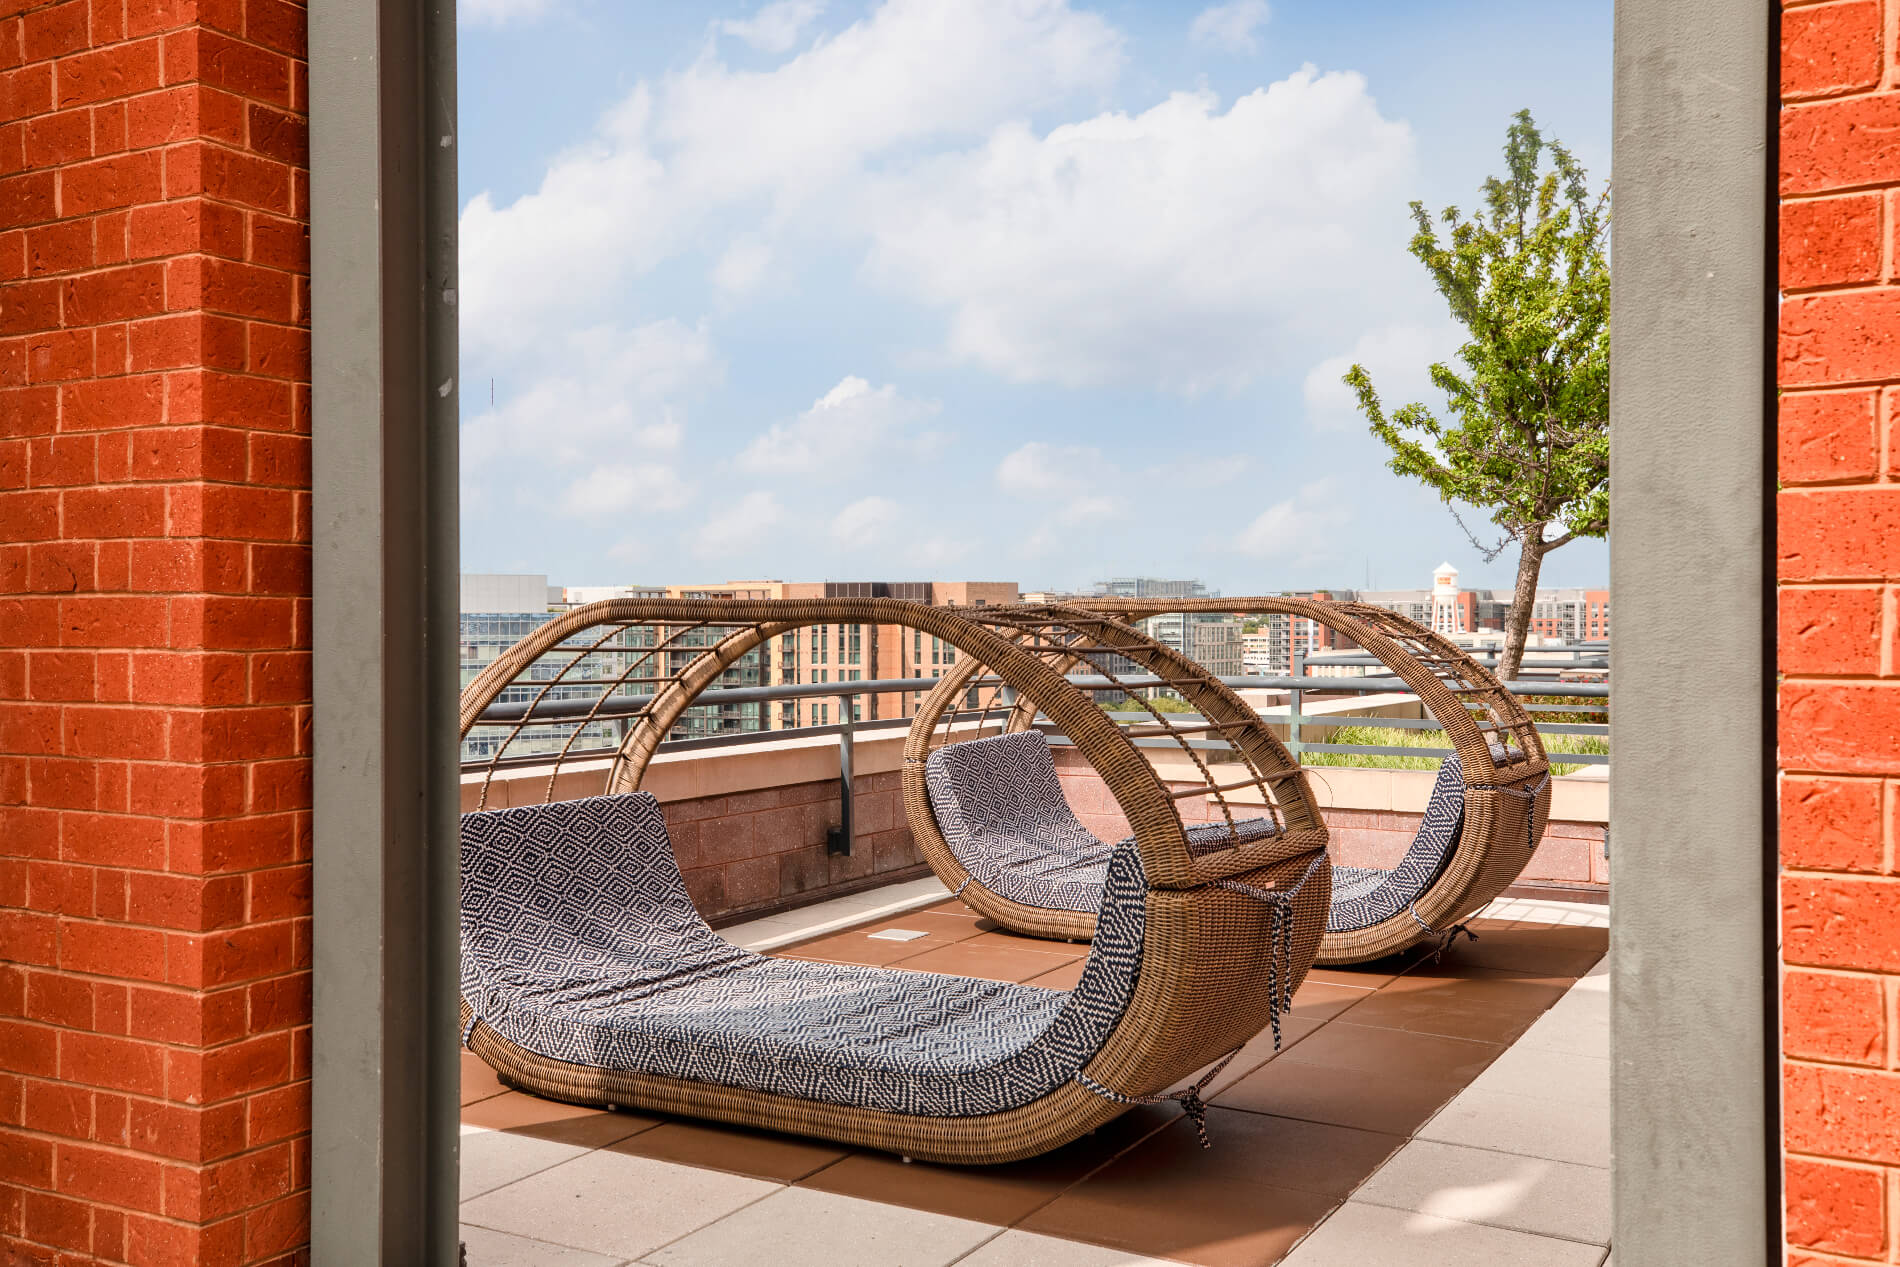 Rooftop wicker chairs in the shape of pods with large cushions